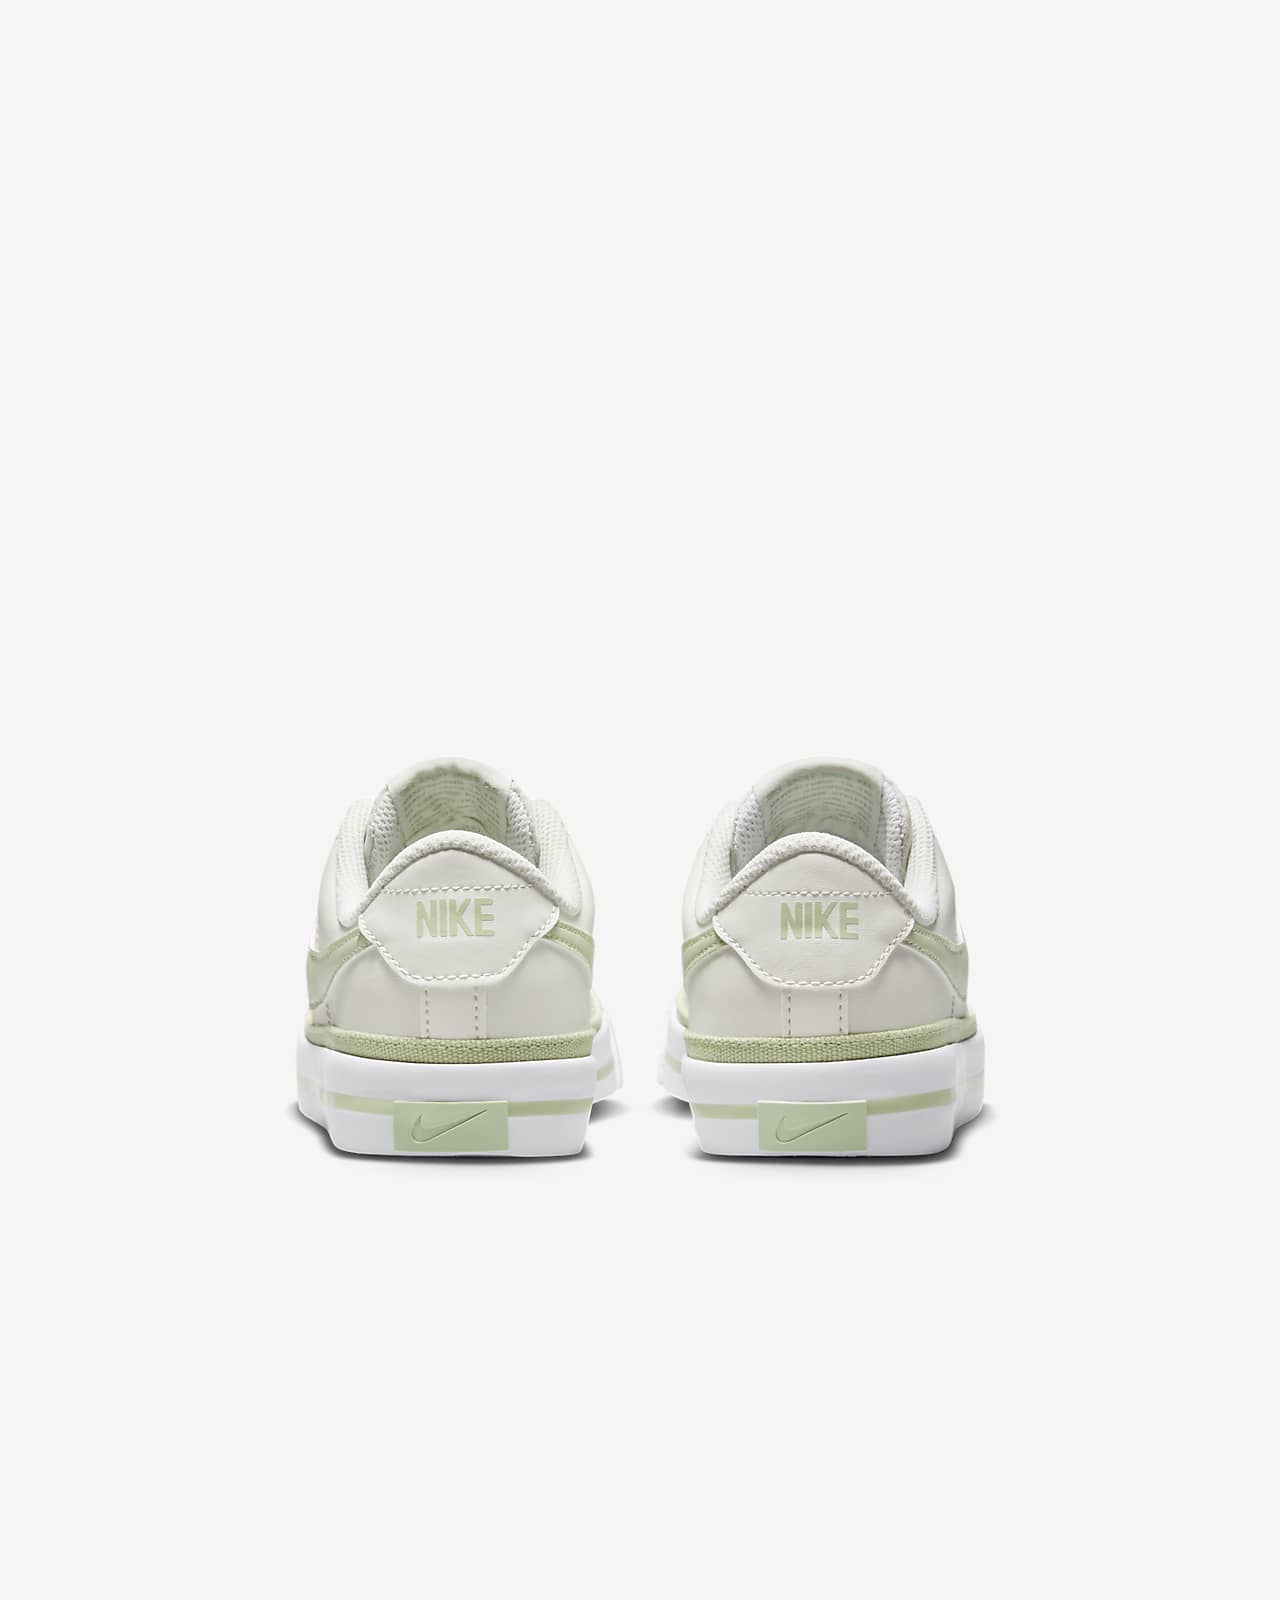 Toddler Nike Footwear - Civilized Nation - Official Site